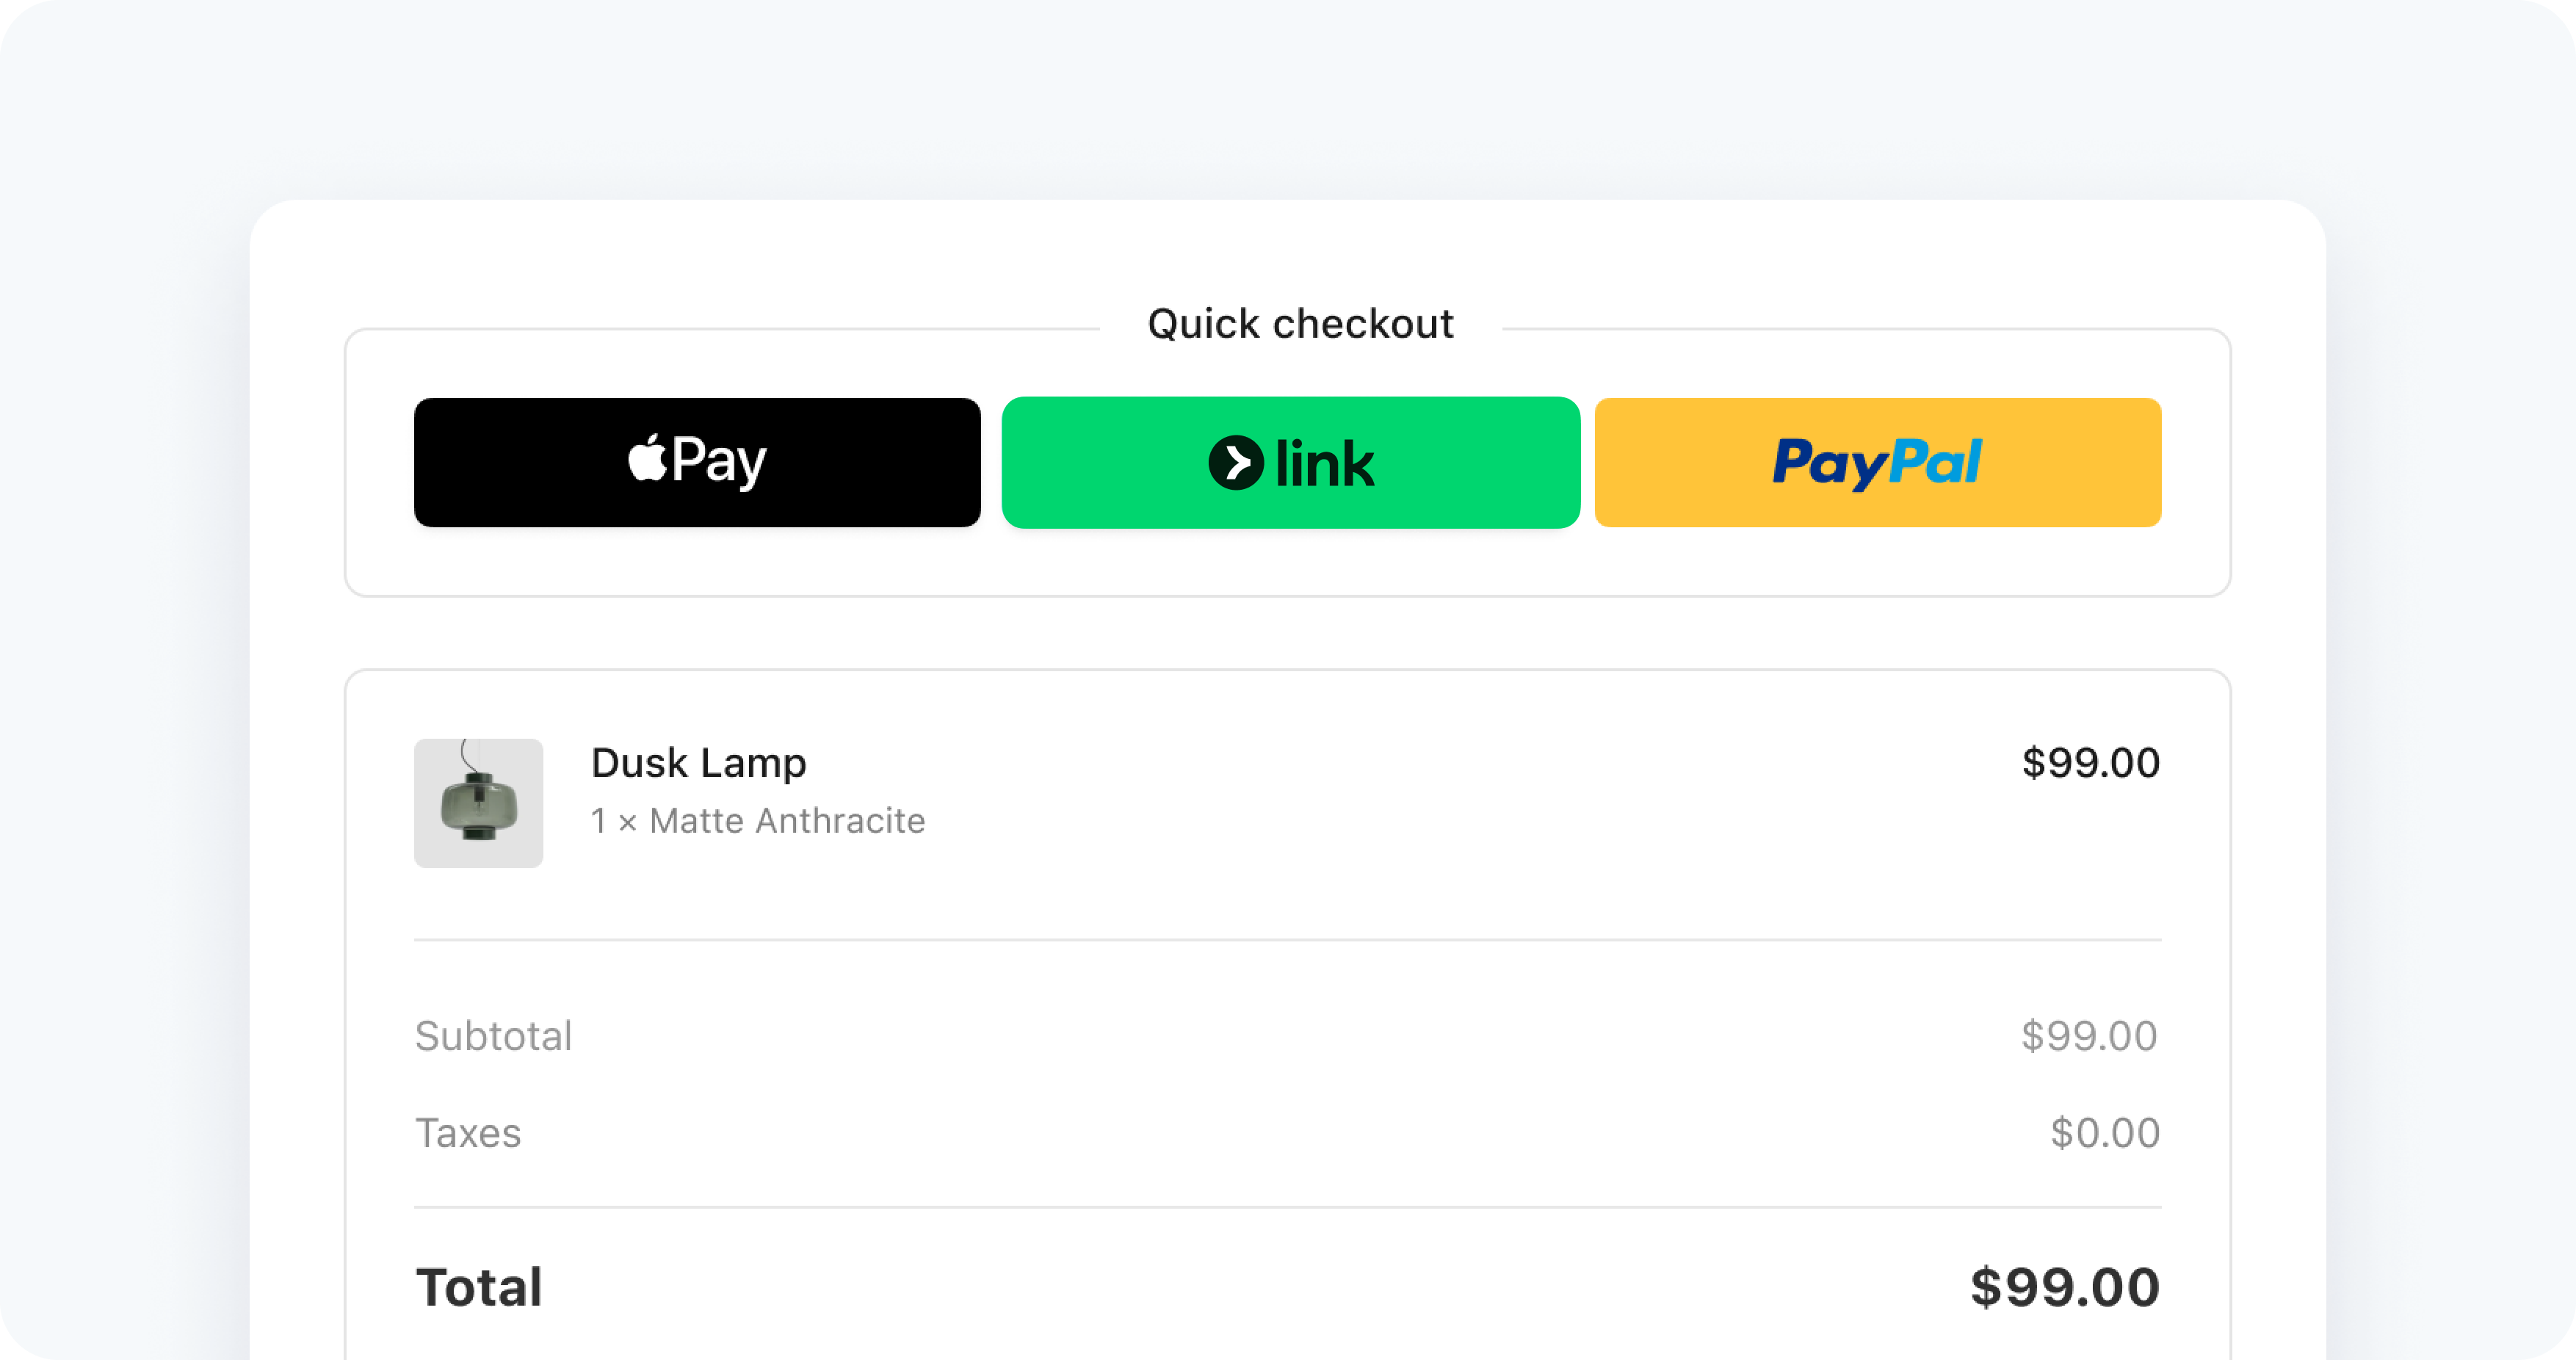 Add Link to the Express Checkout Element